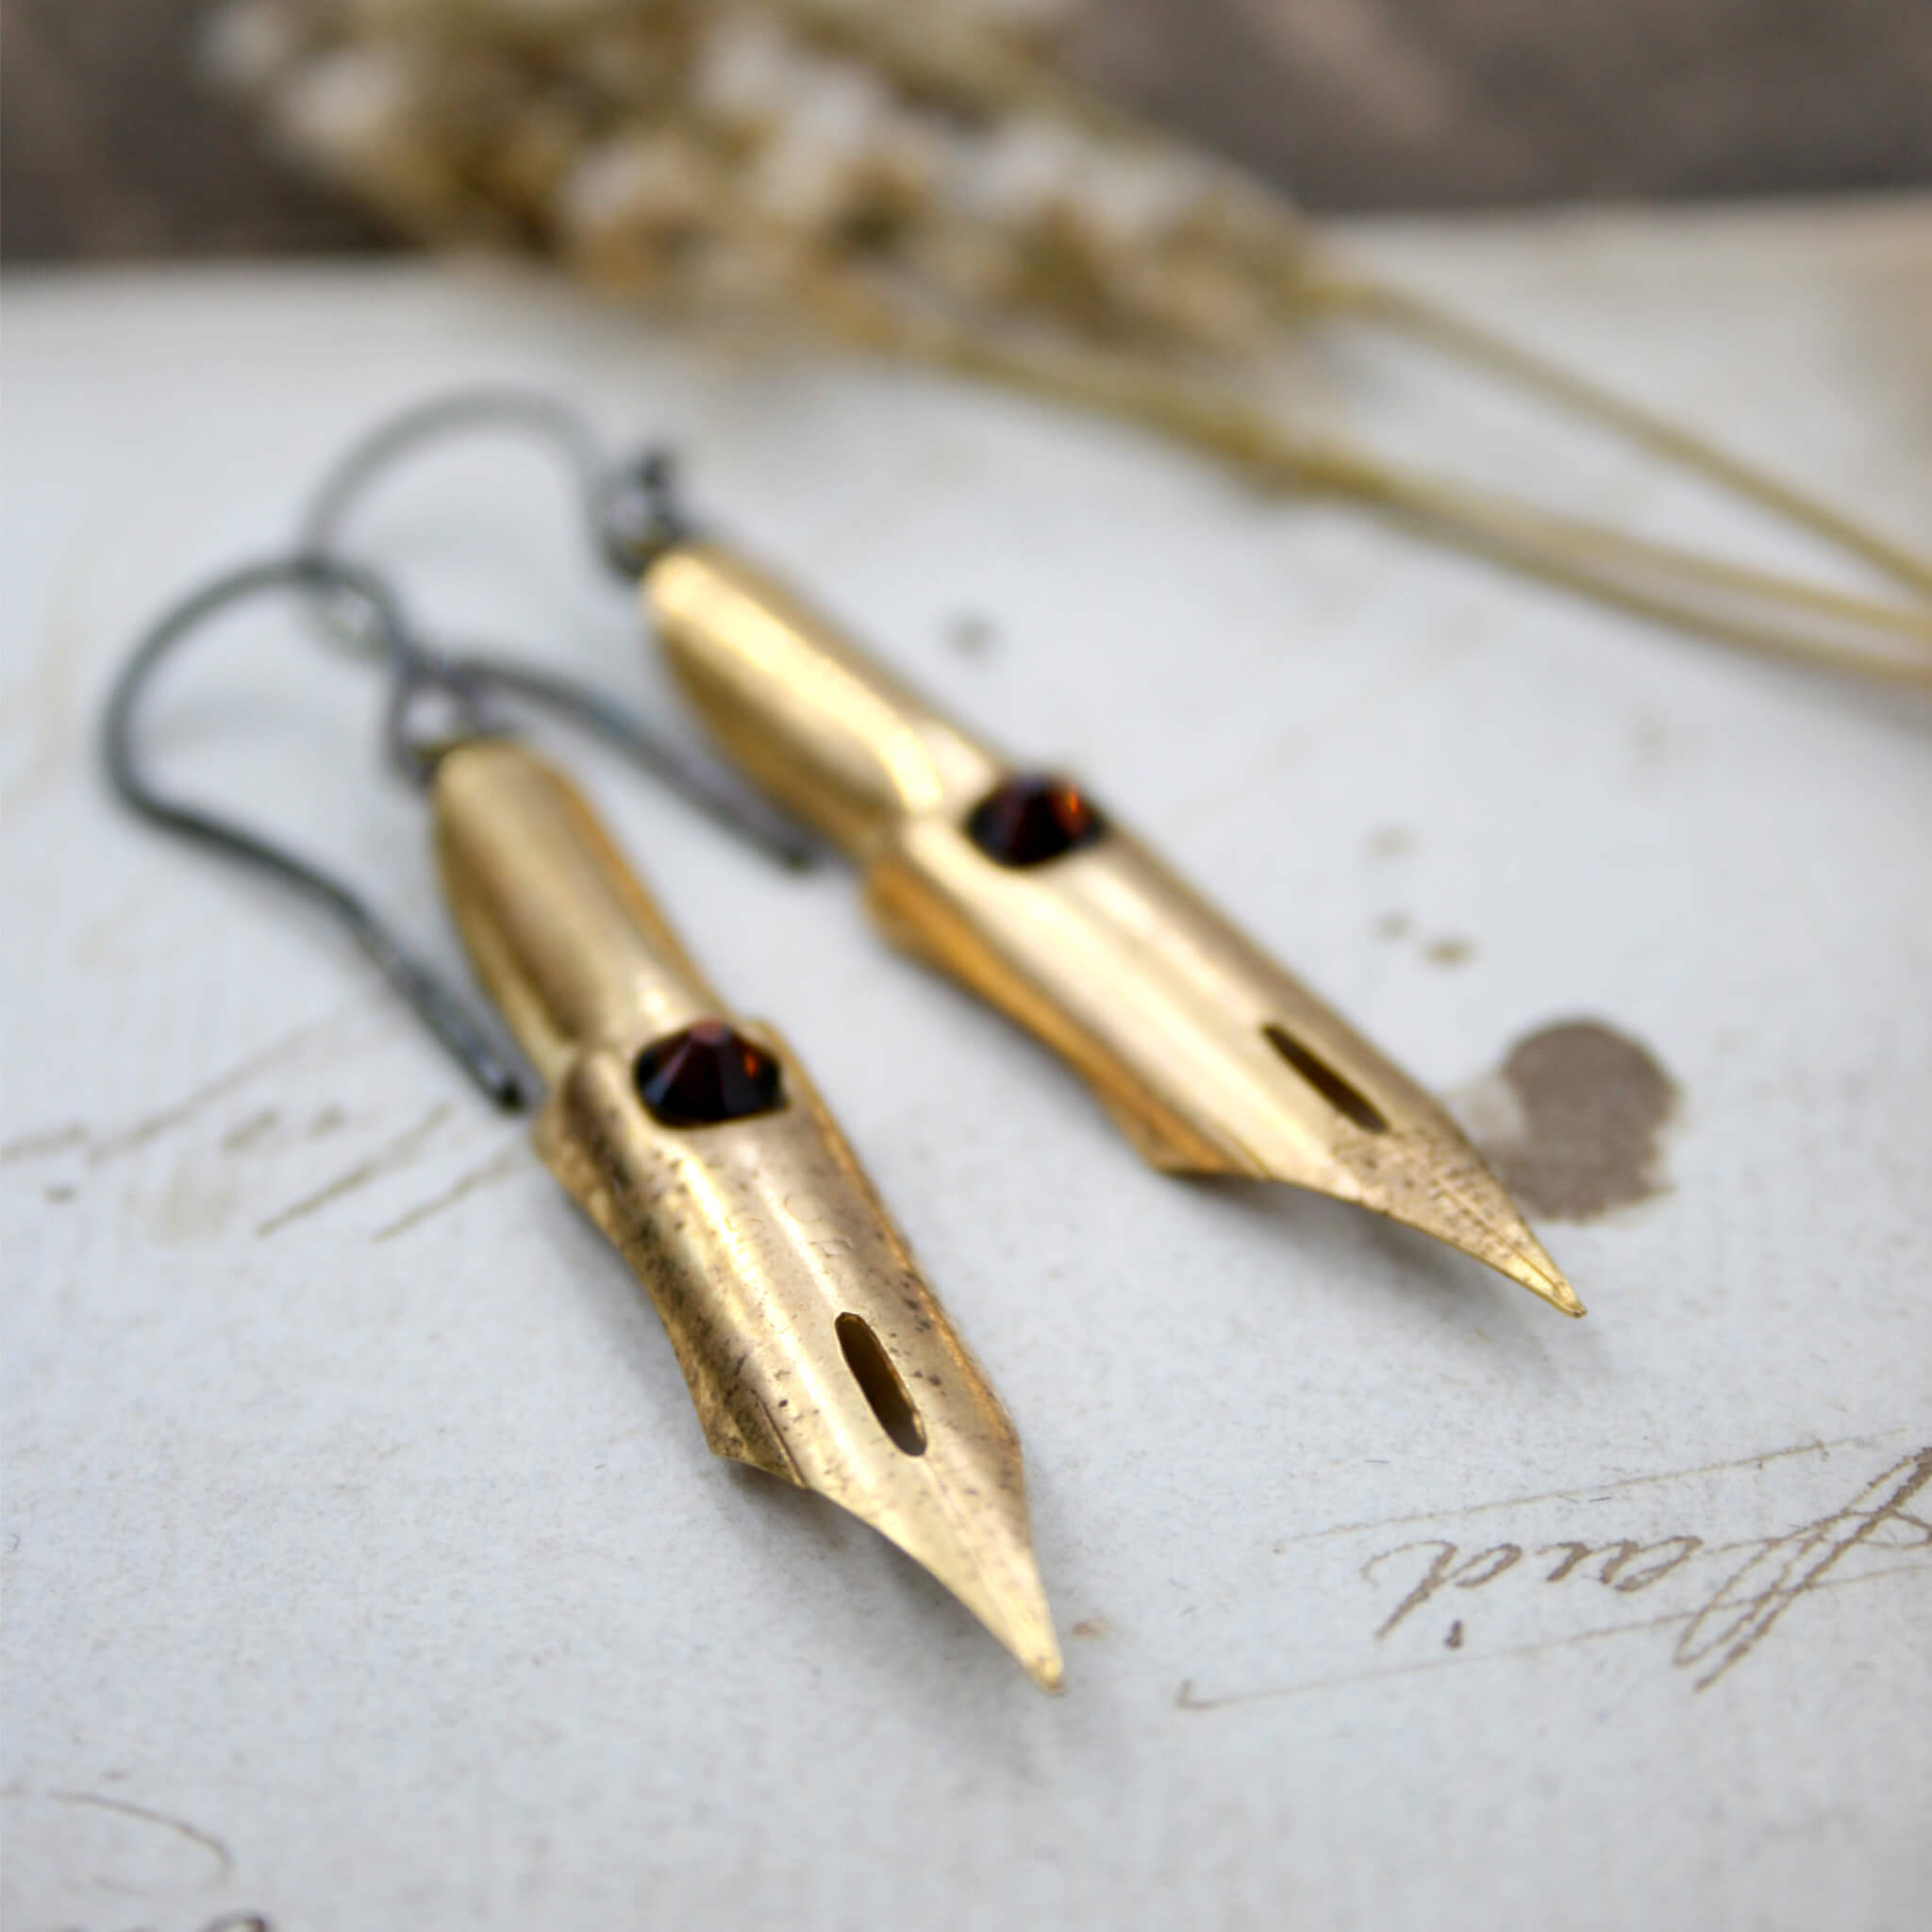 dark academia earrings made of gold coated pen nibs with smoked topaz swarovski crystals